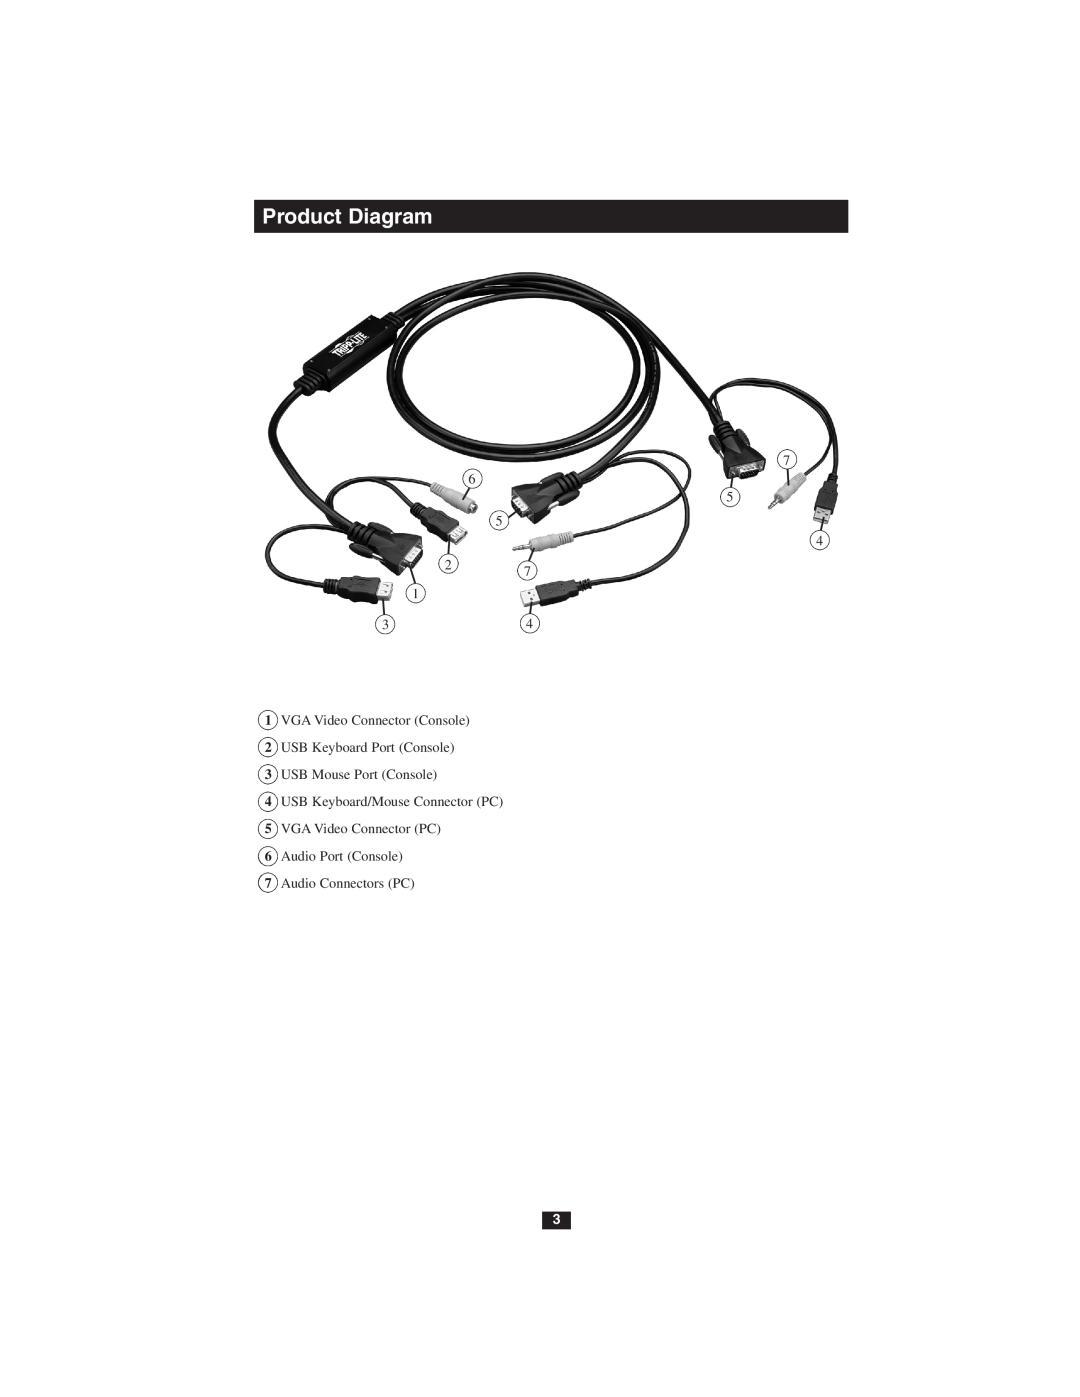 Tripp Lite B034-102-R owner manual Product Diagram, VGA Video Connector Console 2 USB Keyboard Port Console 